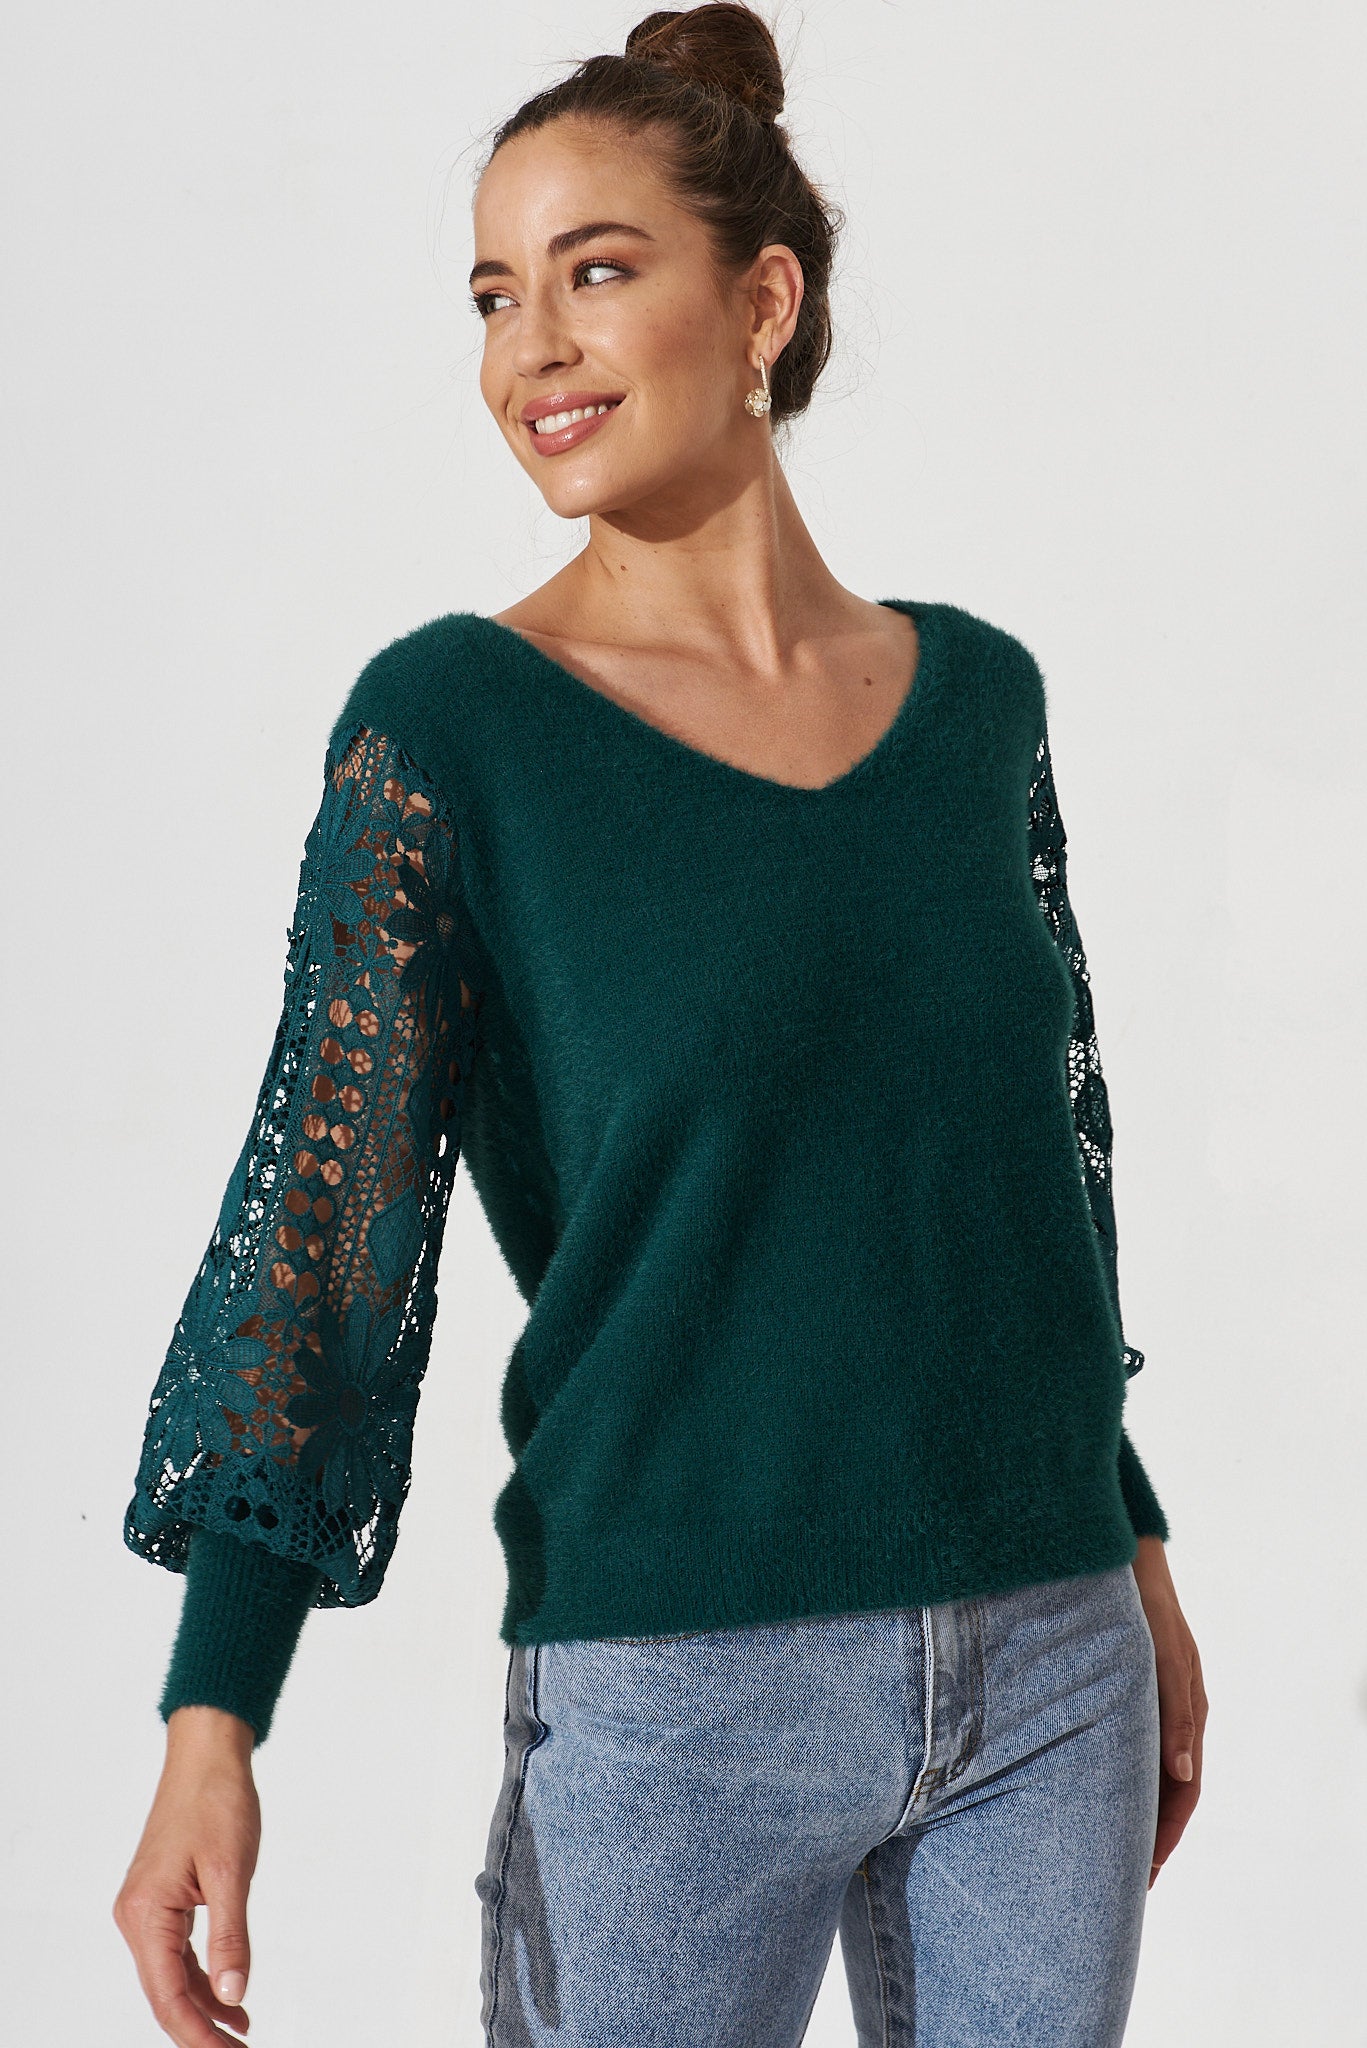 Marita Knit In Teal Lace Detail Wool Blend - front